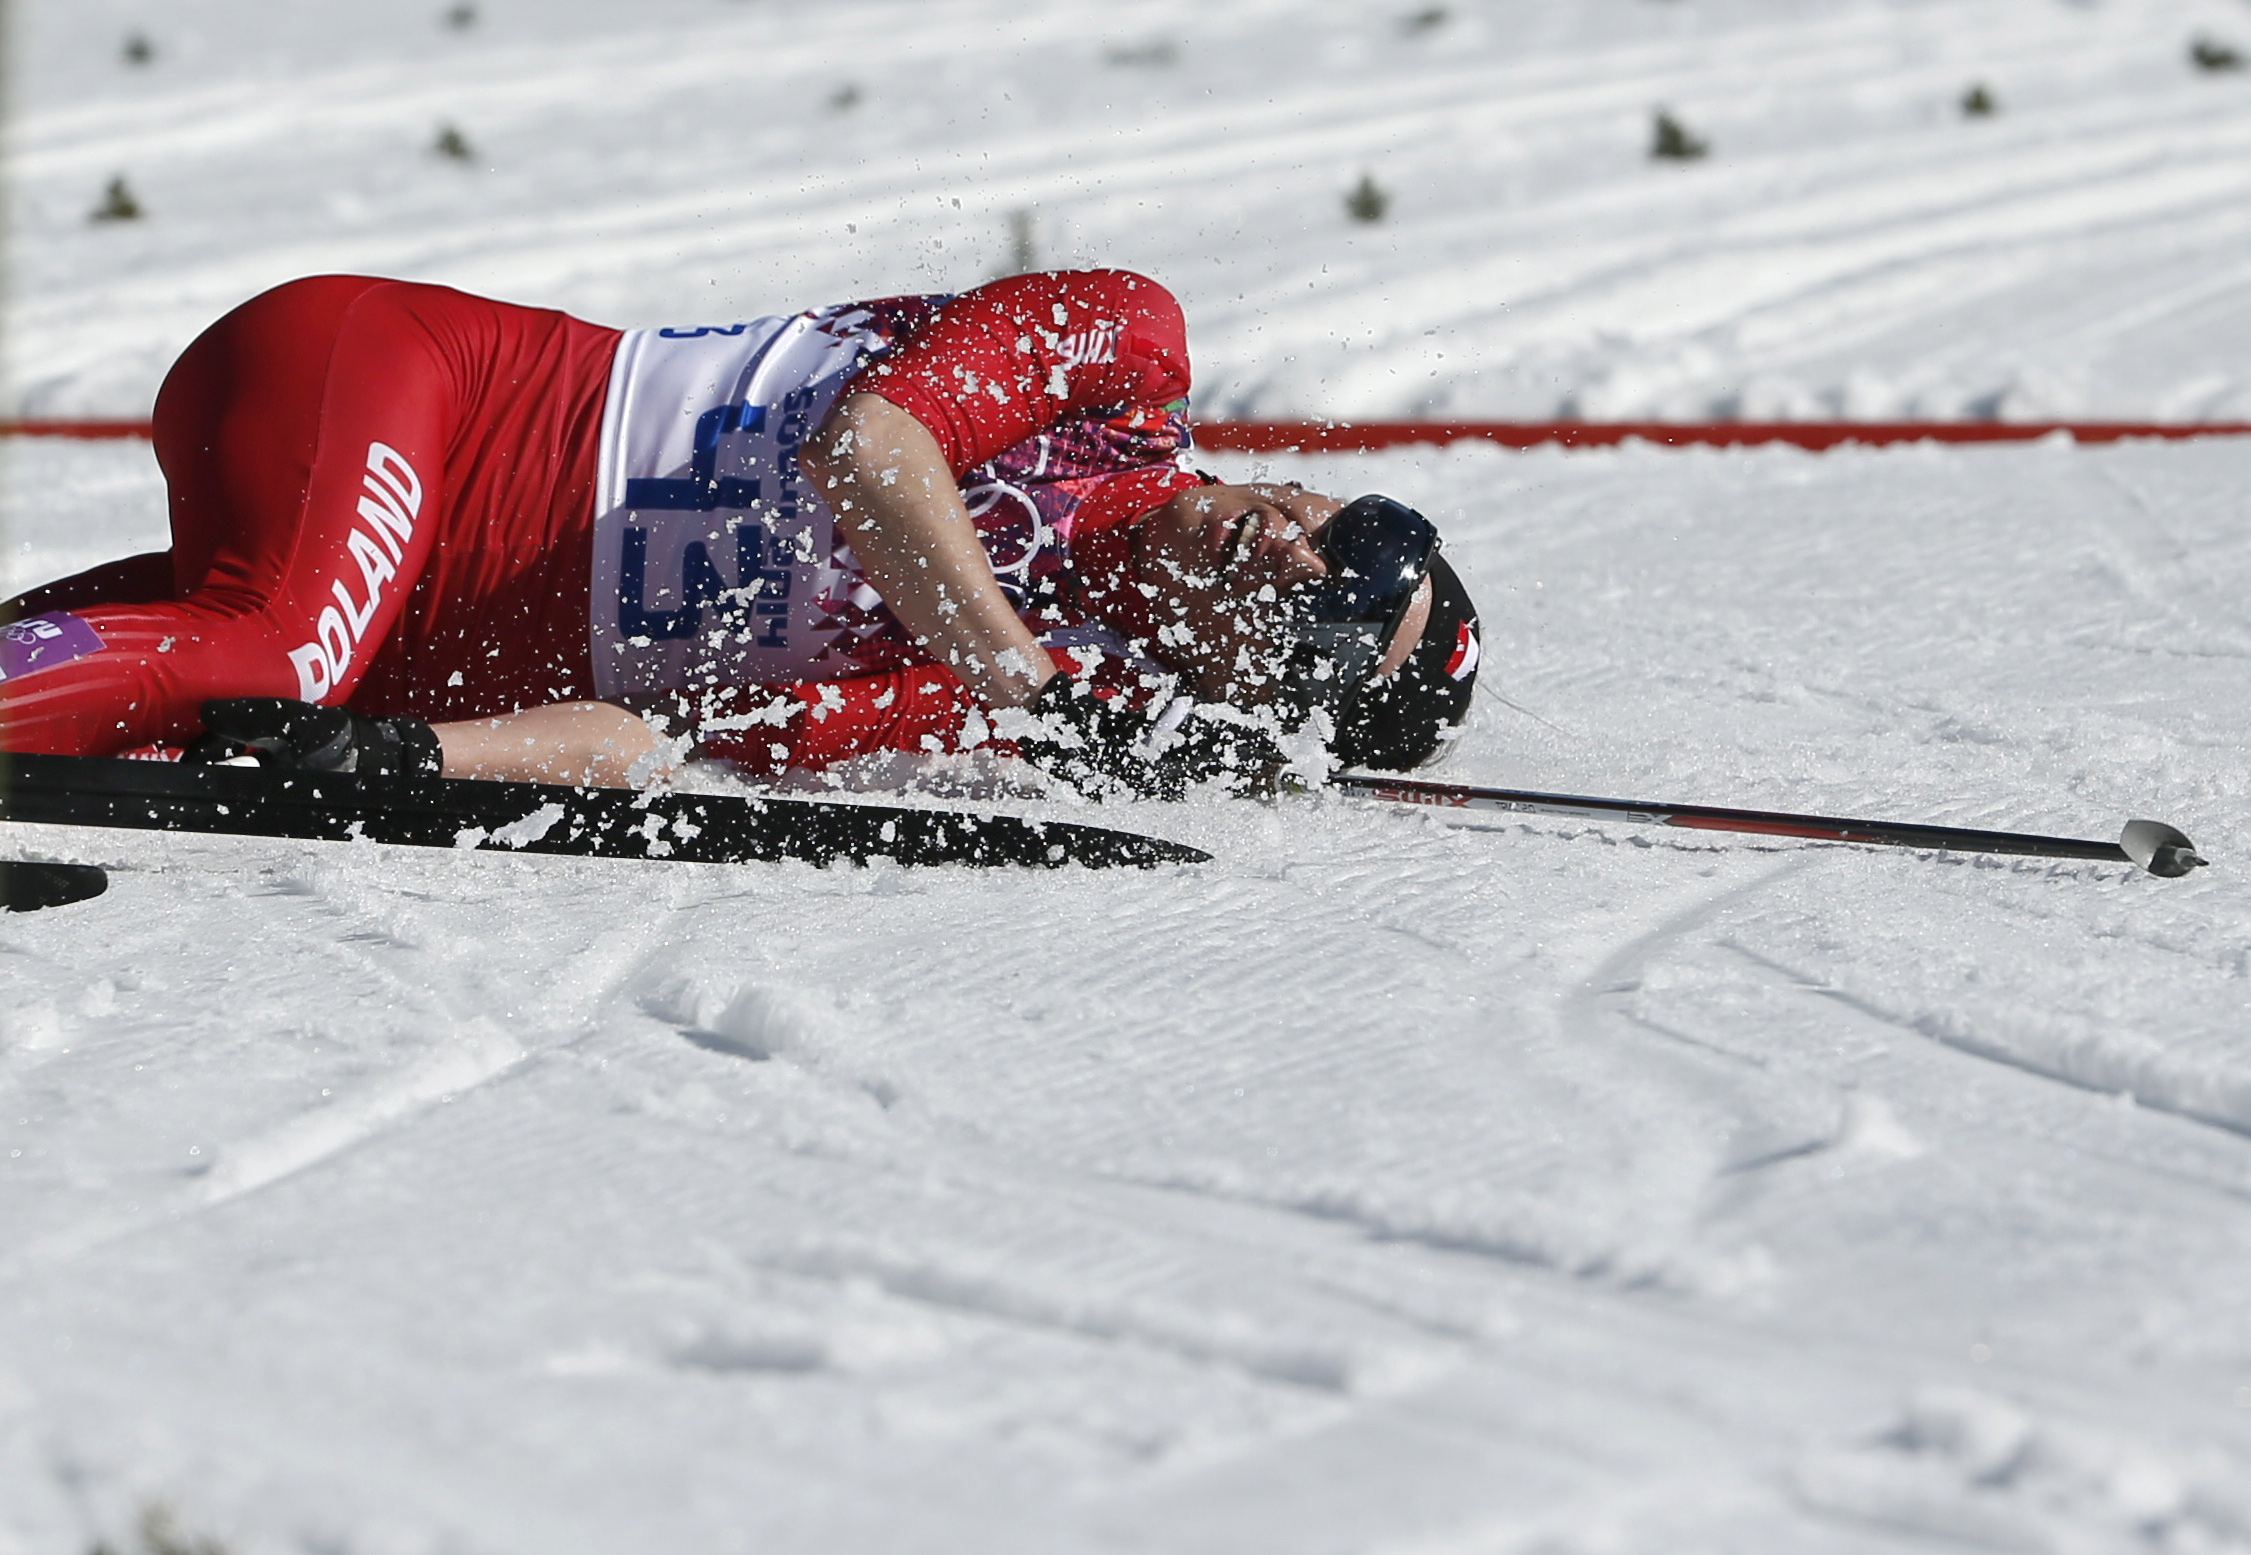 Poland's Justyna Kowalczyk lies on the ground after crossing the finish line in the women's cross-country 10km classic event.